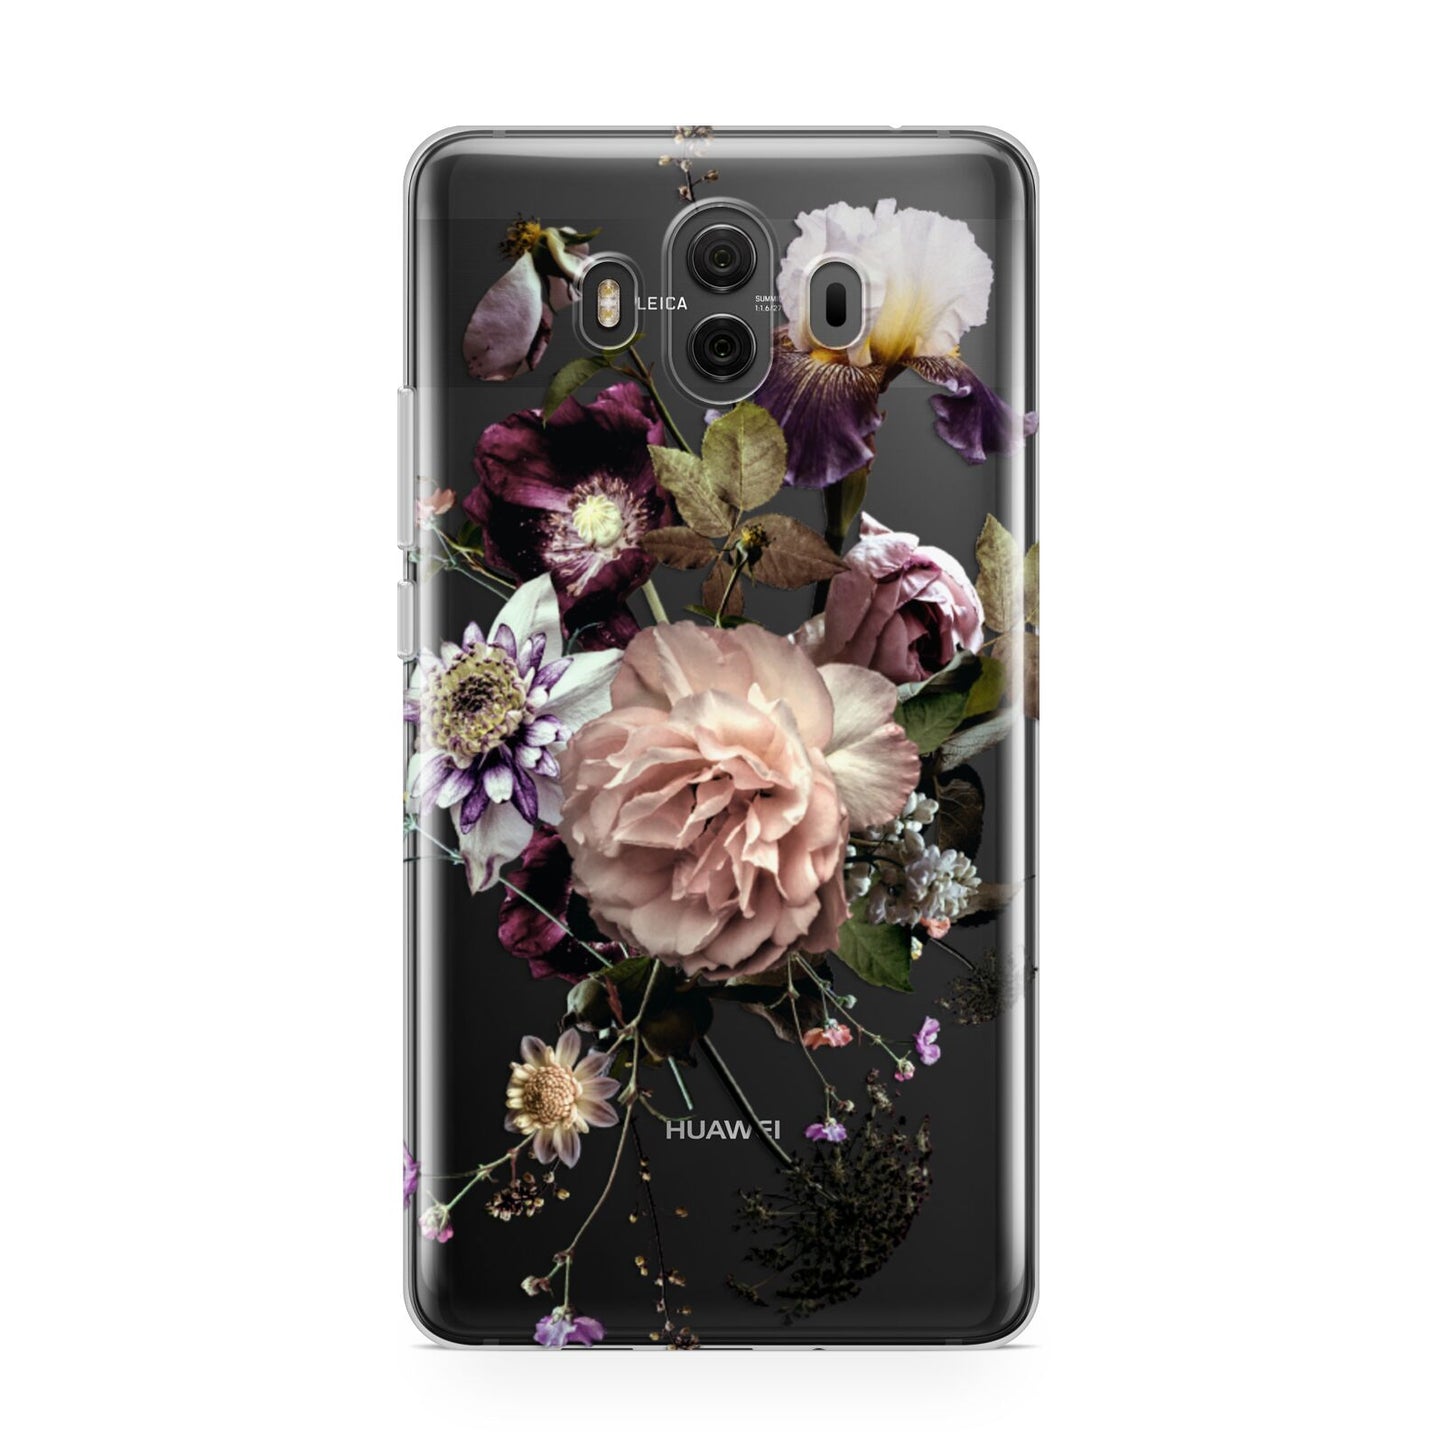 Vintage Flowers Huawei Mate 10 Protective Phone Case